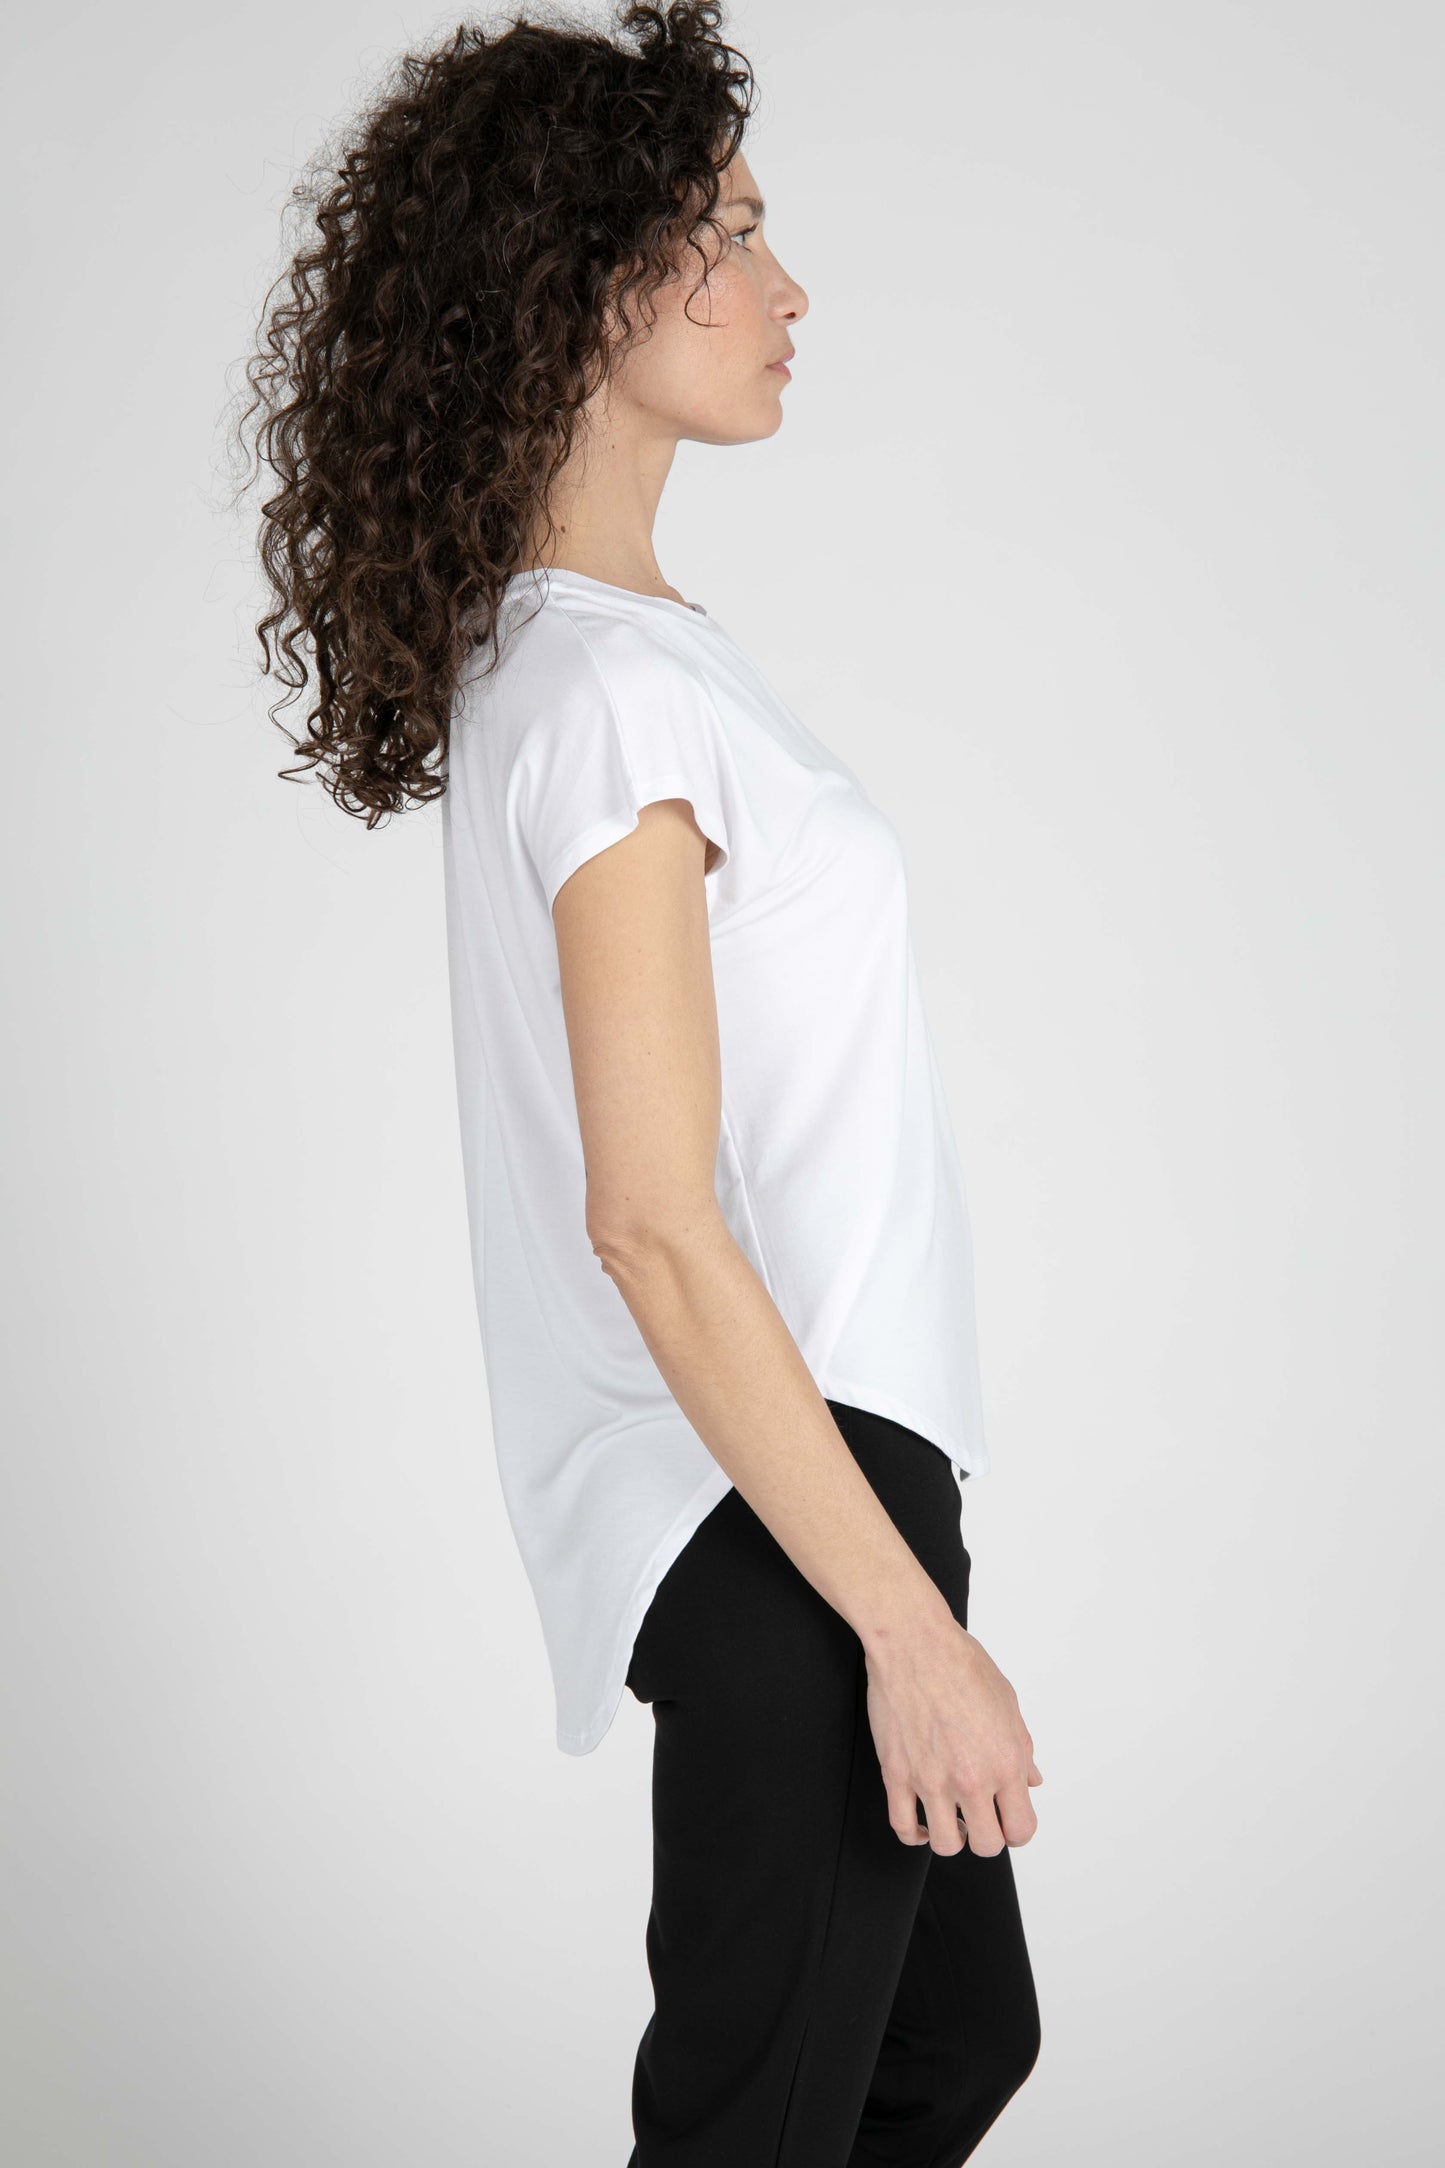 The Tuck-In Tee